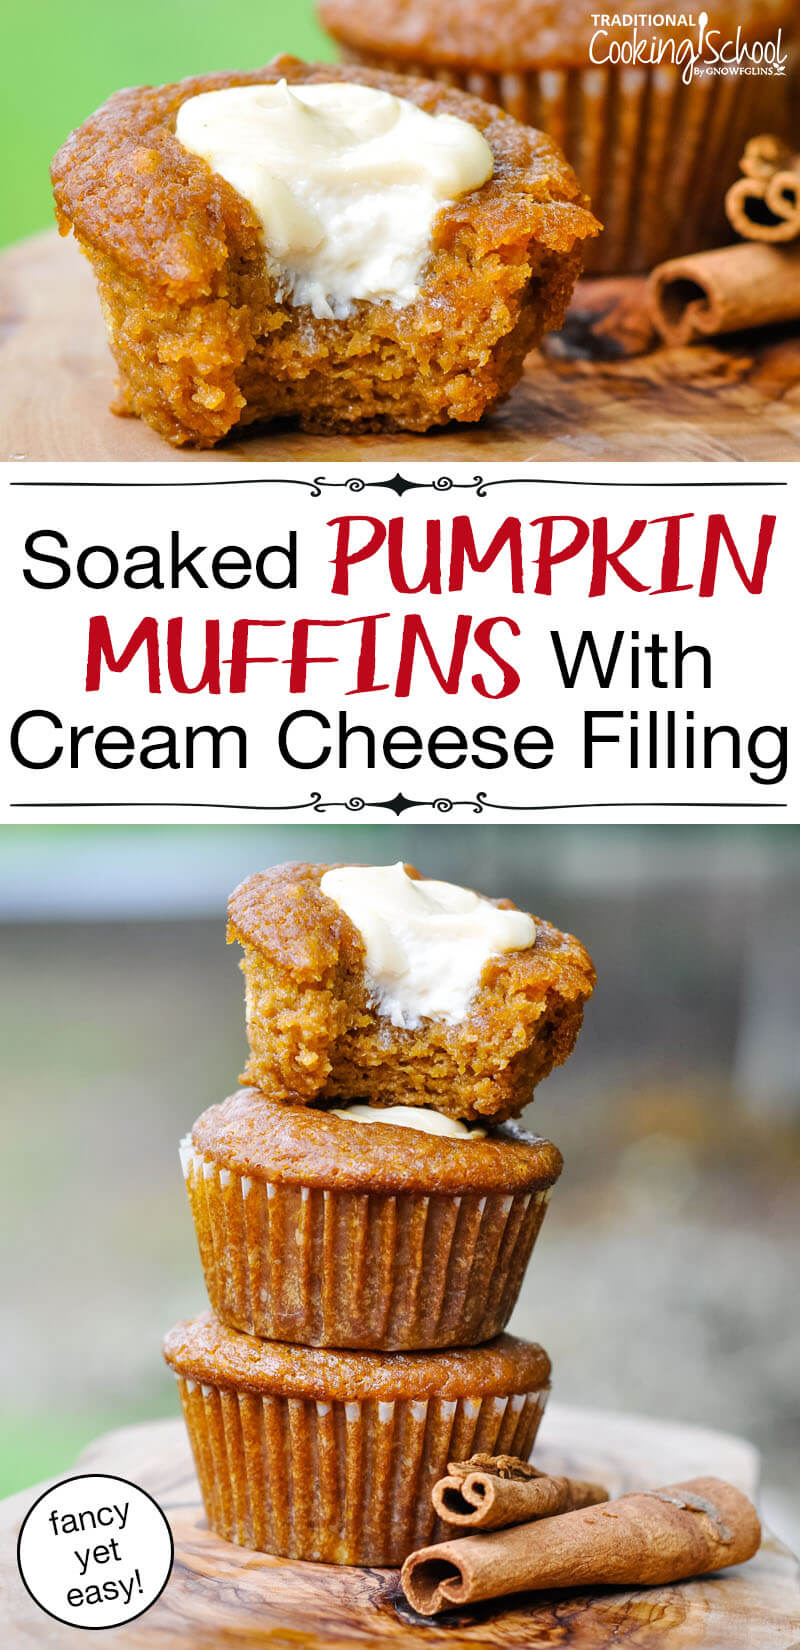 photo collage of pumpkin muffins, one with a bite taken out of it to show a pocket of cream cheese filling, with text overlay: "Soaked Pumpkin Muffins With Cream Cheese Filling (fancy yet easy!)"